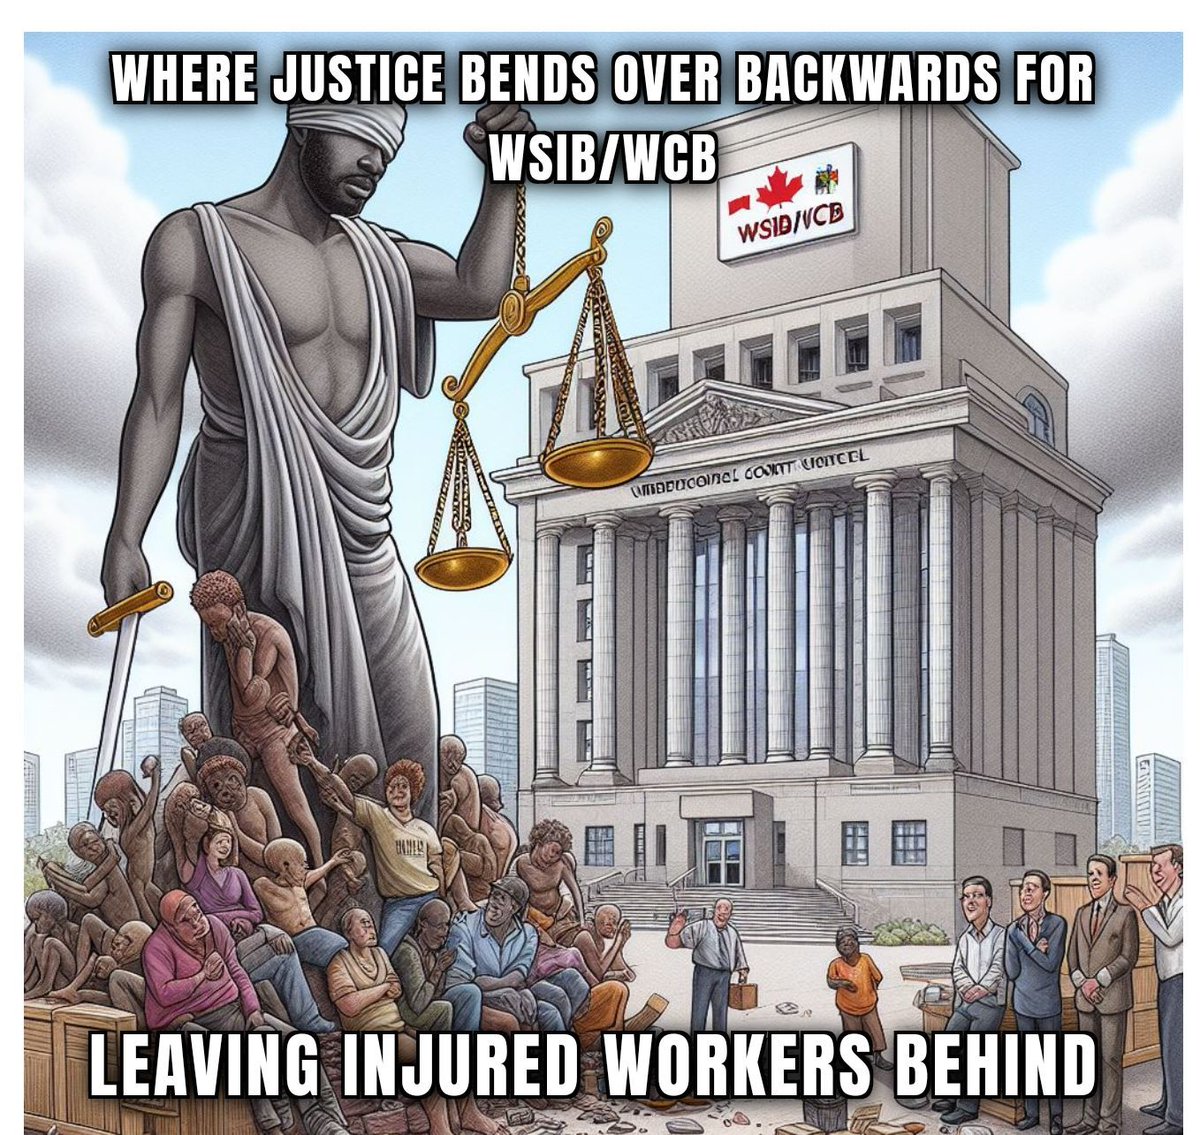 Where justice bends over backwards for WSIB/WCB, leaving injured workers behind. The WSIB often symbolizes blinded justice, with injured workers left to suffer. It's time for change! #InjuredWorkers #WorkersRights #wsib #wcb #workers #canada